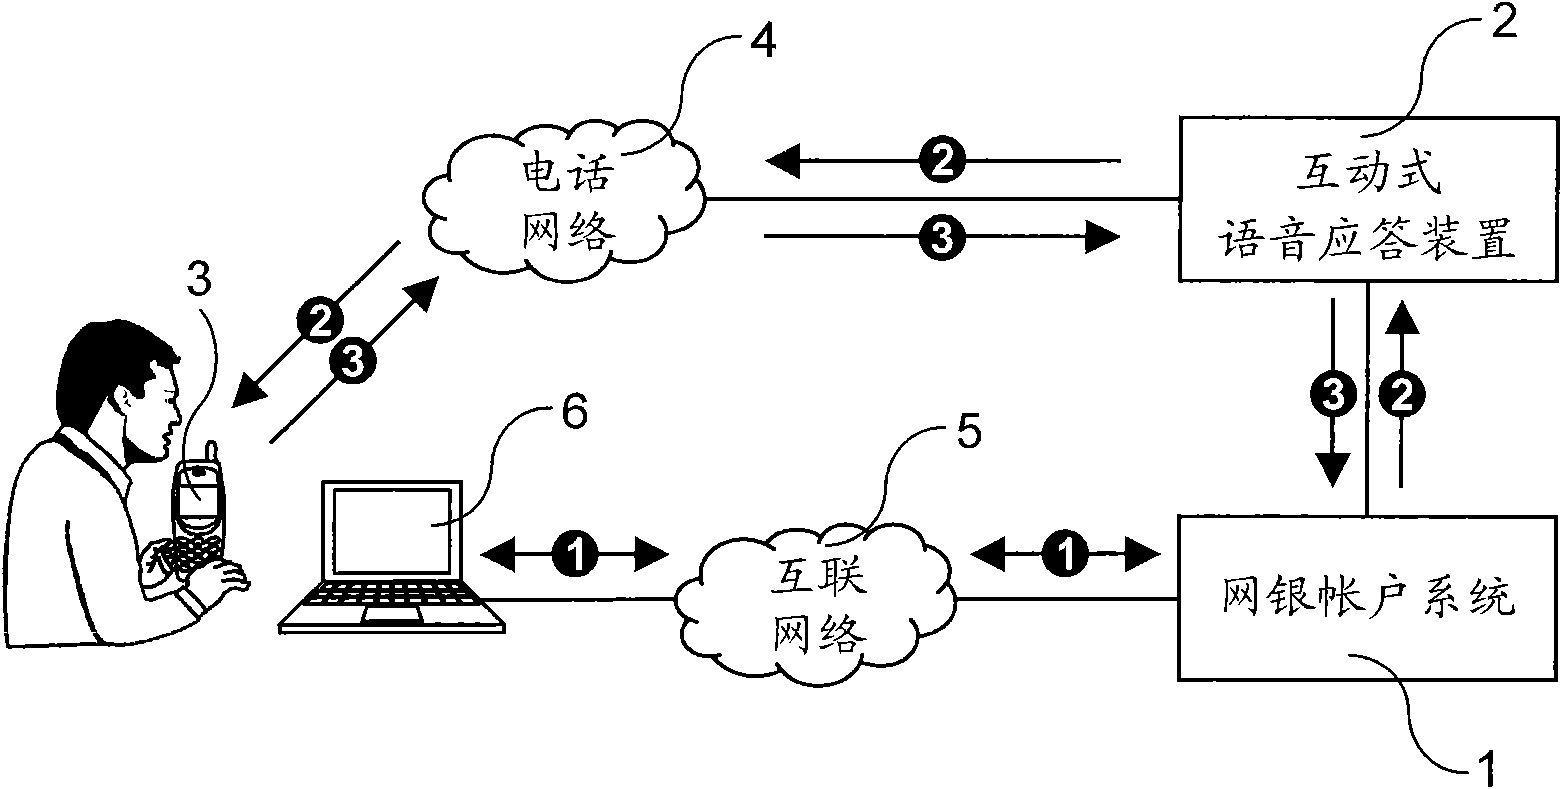 Security guarding method for automatically calling to inform customer of logining, transferring and paying of internet banking